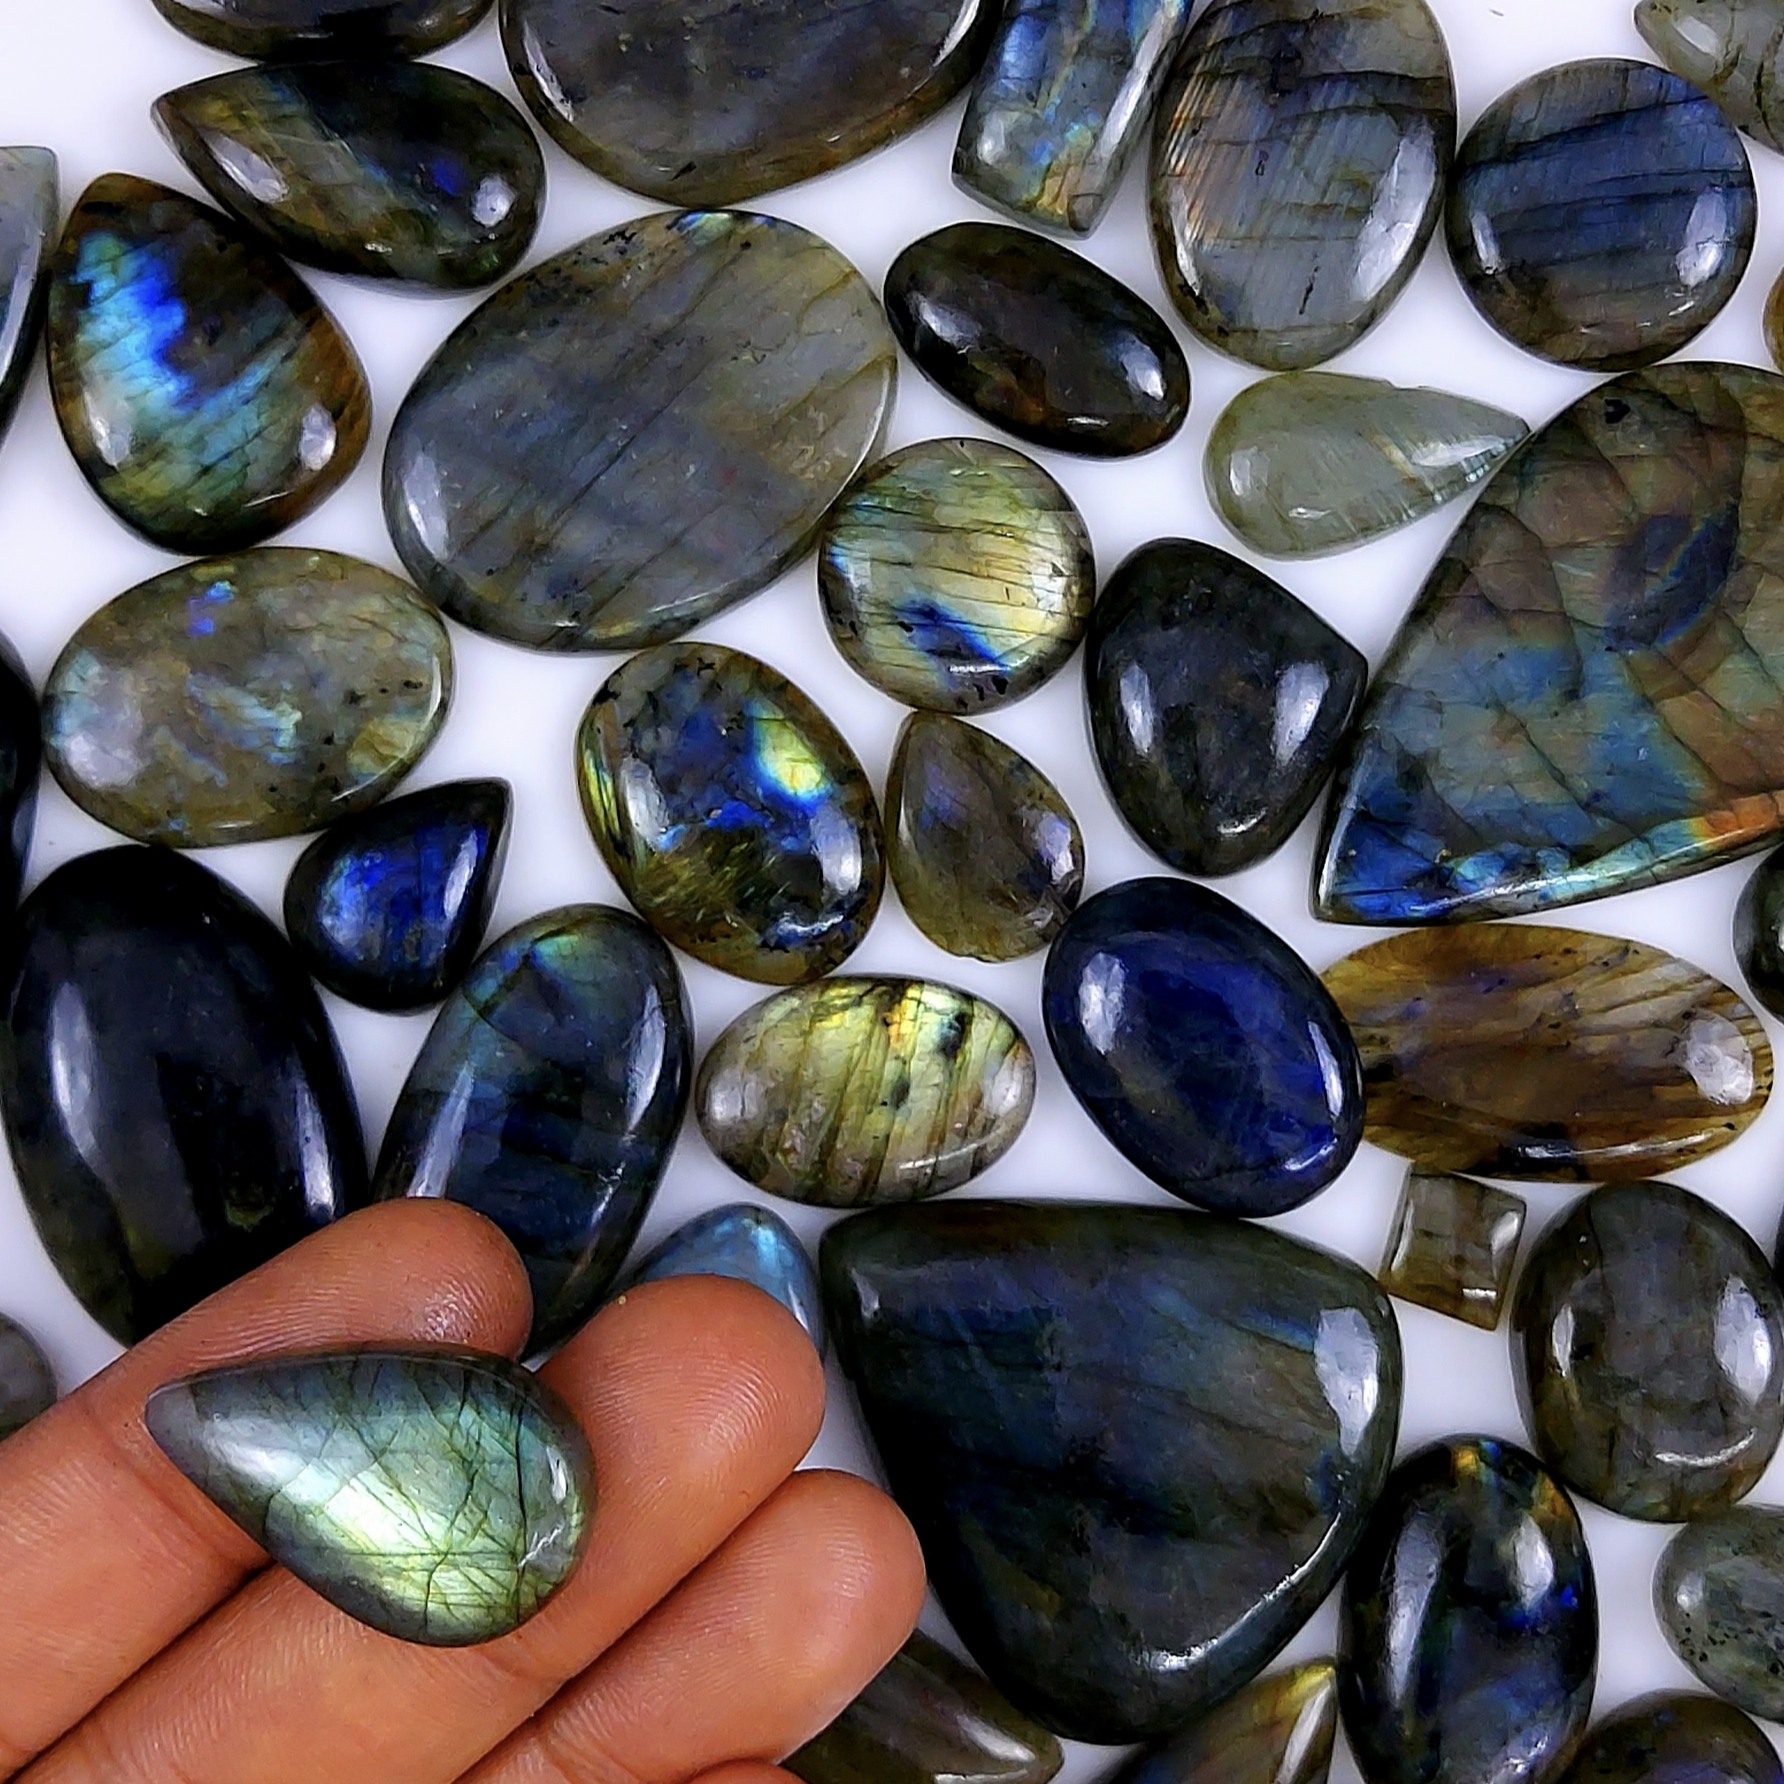 50pc 1749Cts Labradorite Cabochon Multifire Healing Crystal For Jewelry Supplies, Labradorite Necklace Handmade Wire Wrapped Gemstone Pendant 58x38 20x15 mm#6280